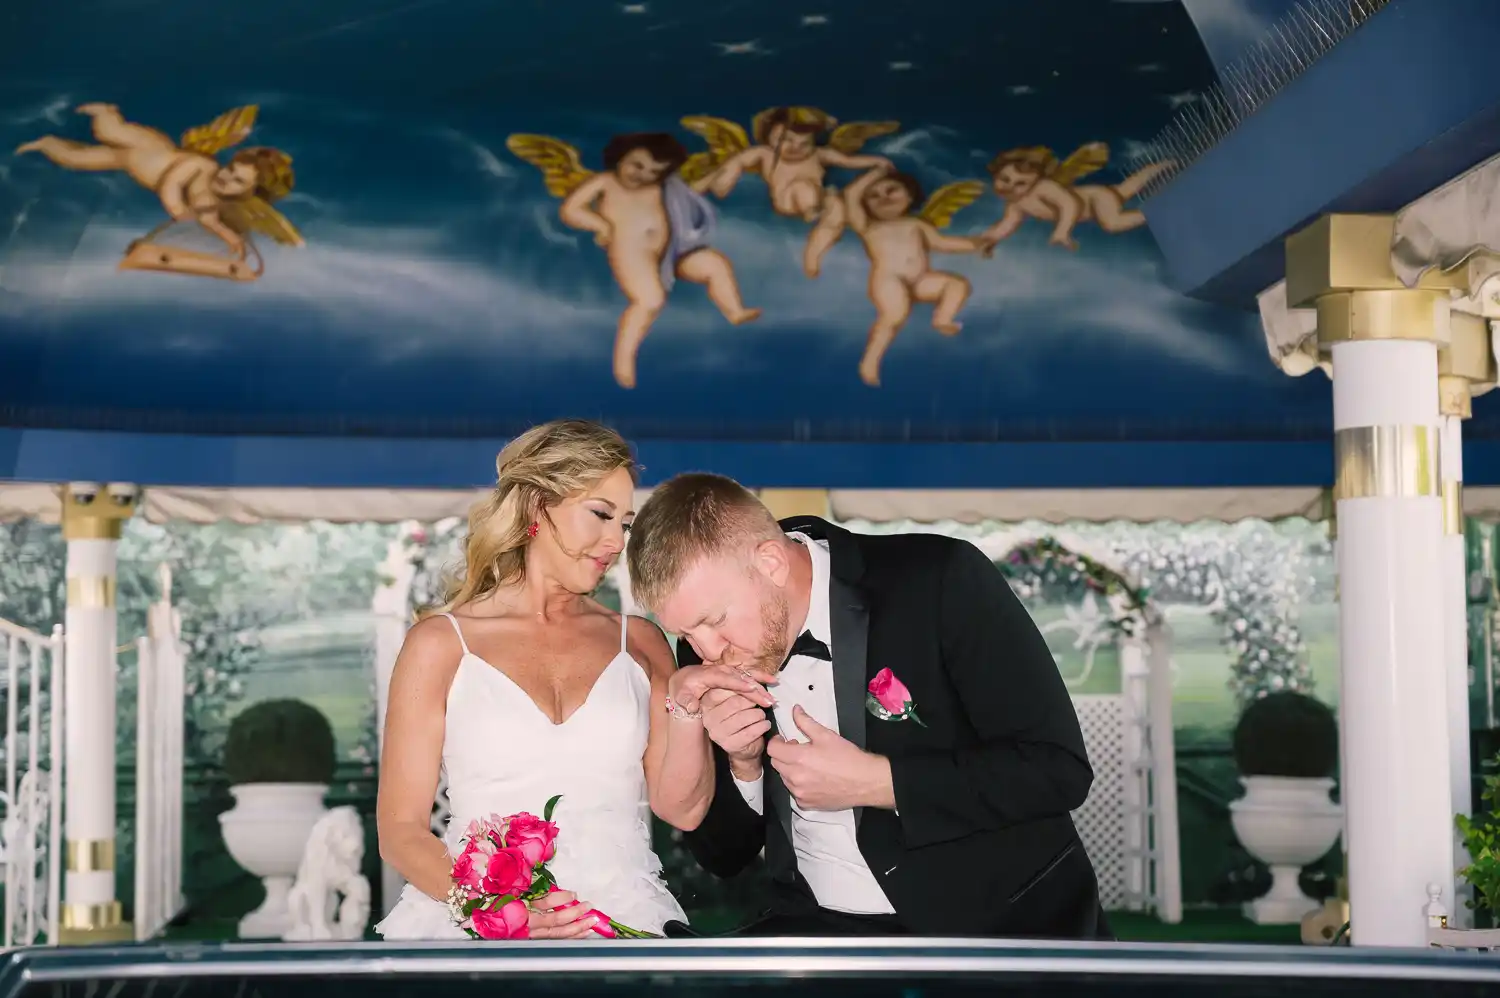 Little White Chapel Las Vegas photography pink Cadillac ceremony